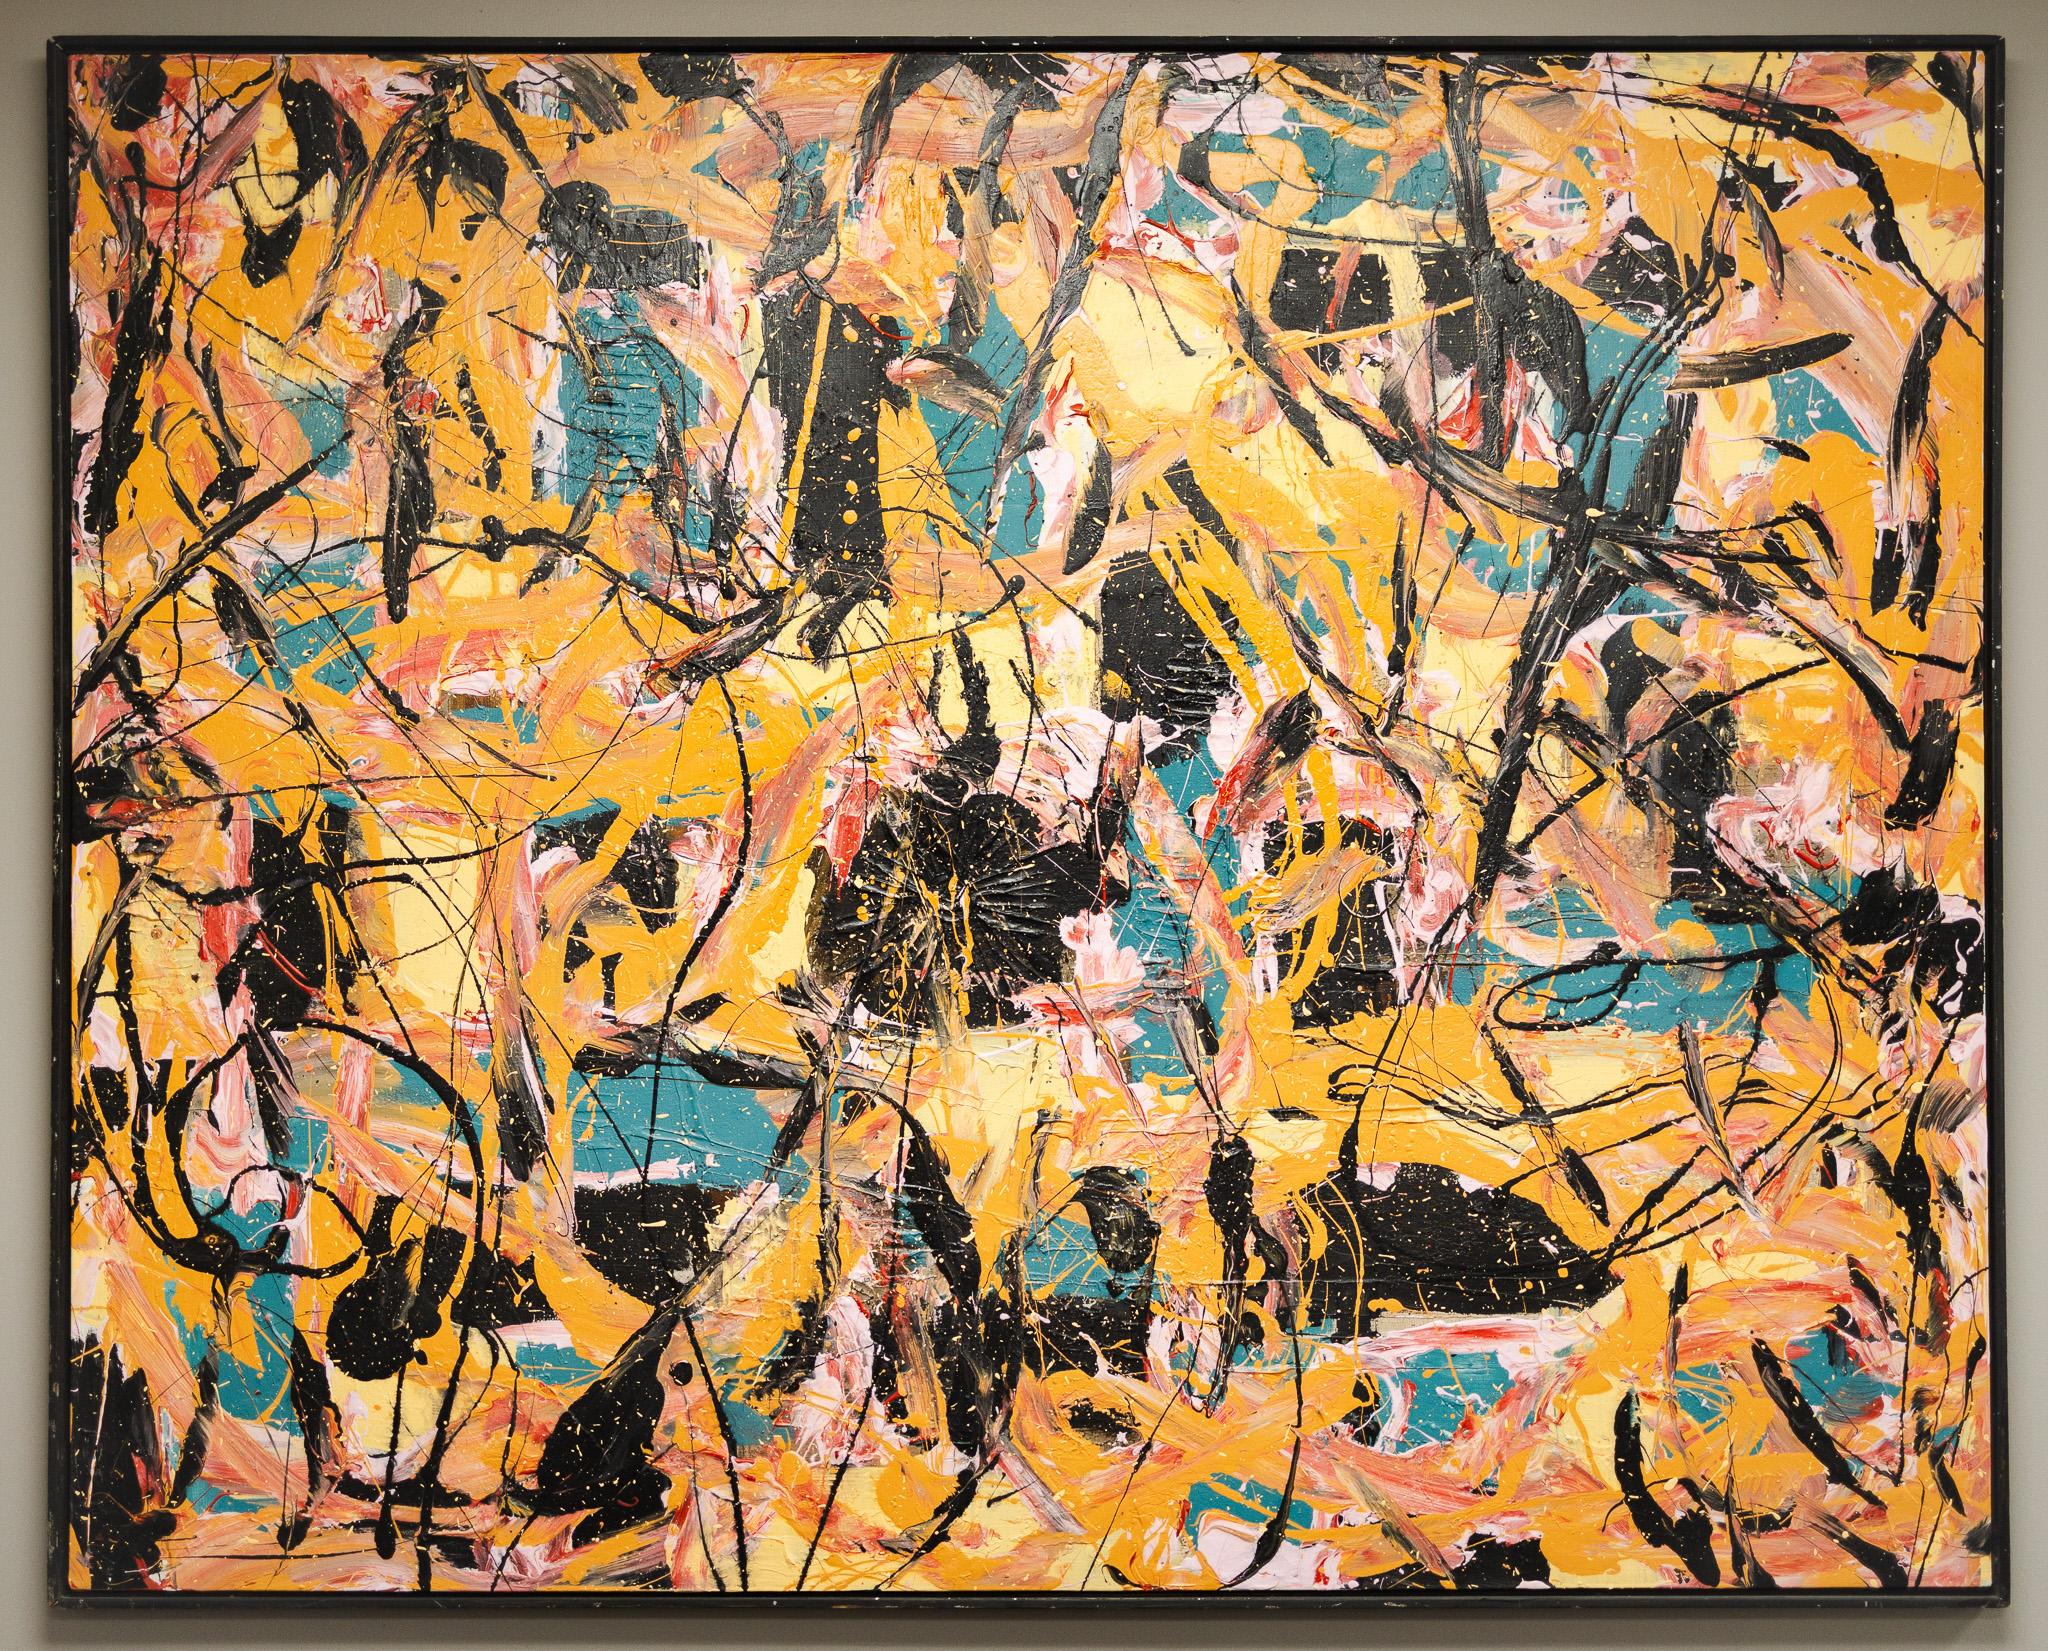 Abstract in Black, Yellow, Orange, Pink, and Teal - Painting by Jack Nichols